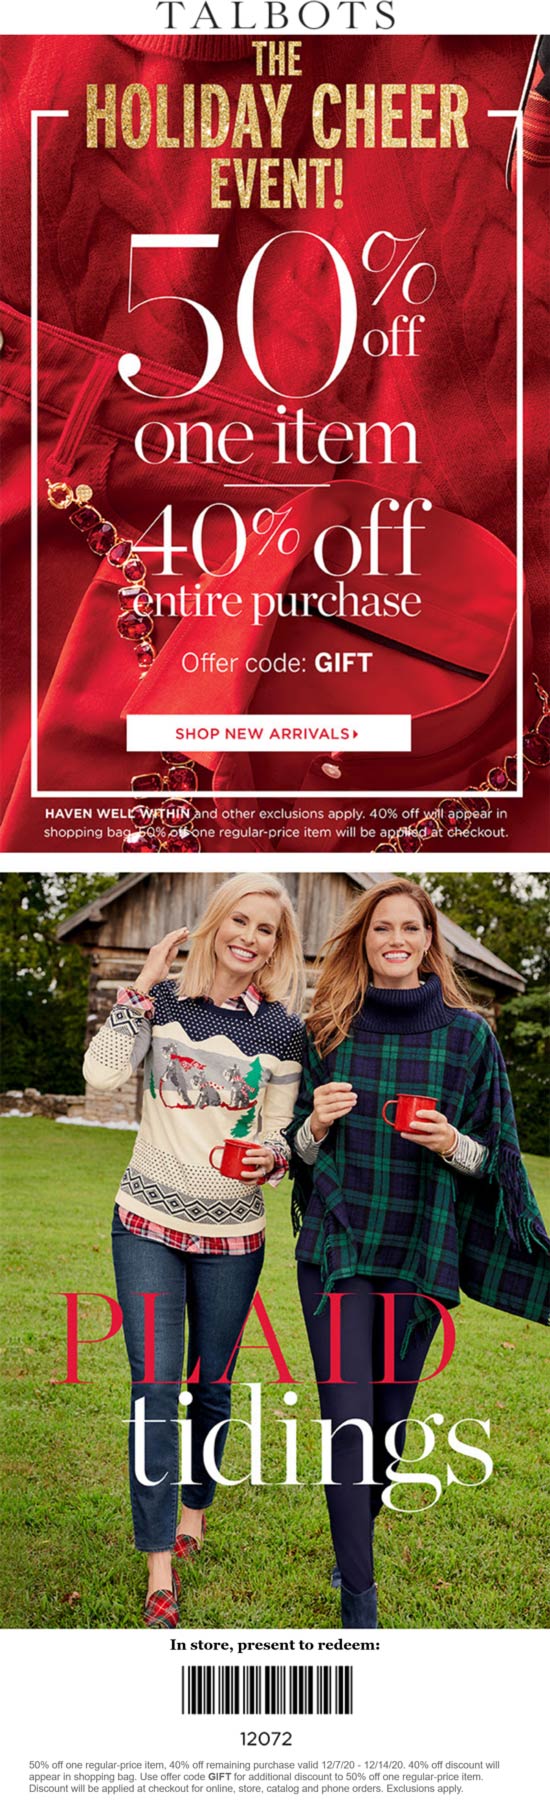 Talbots stores Coupon  50% off a single item & 40% off everything at Talbots, or online via promo code GIFT #talbots 